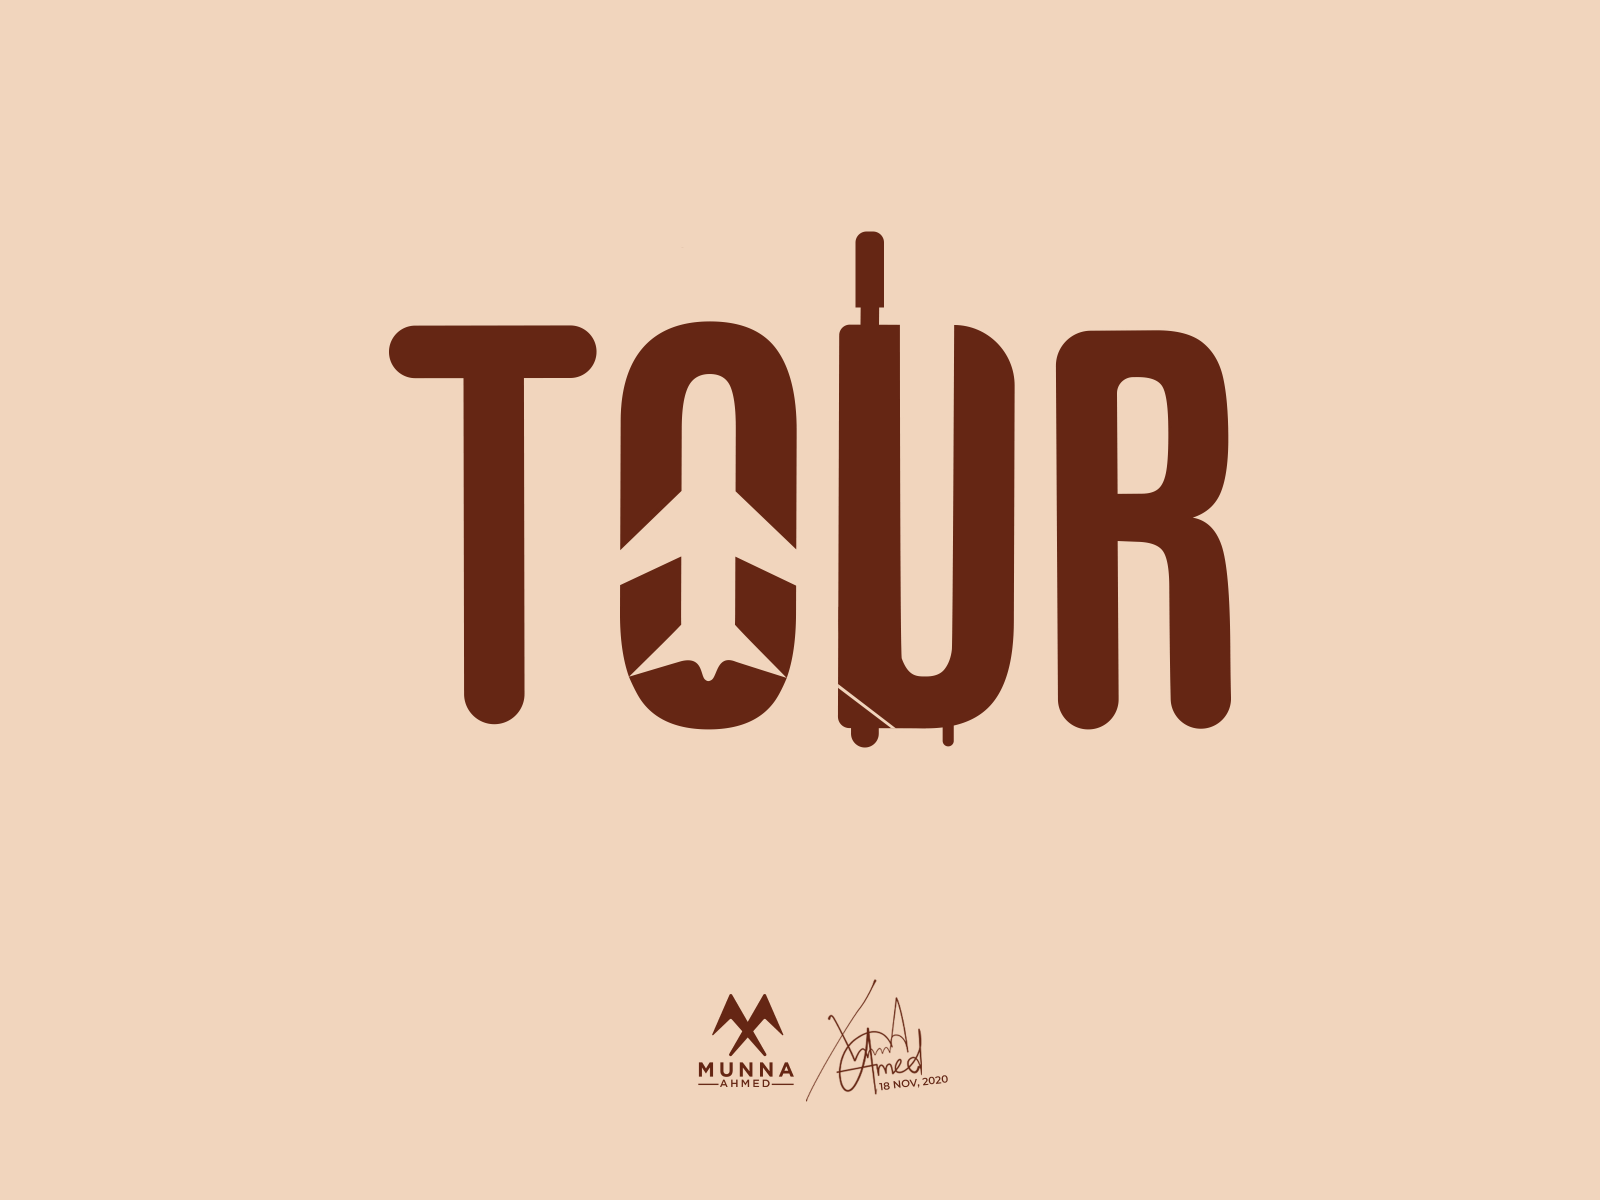 Tour Logo Design by Munna Ahmed on Dribbble